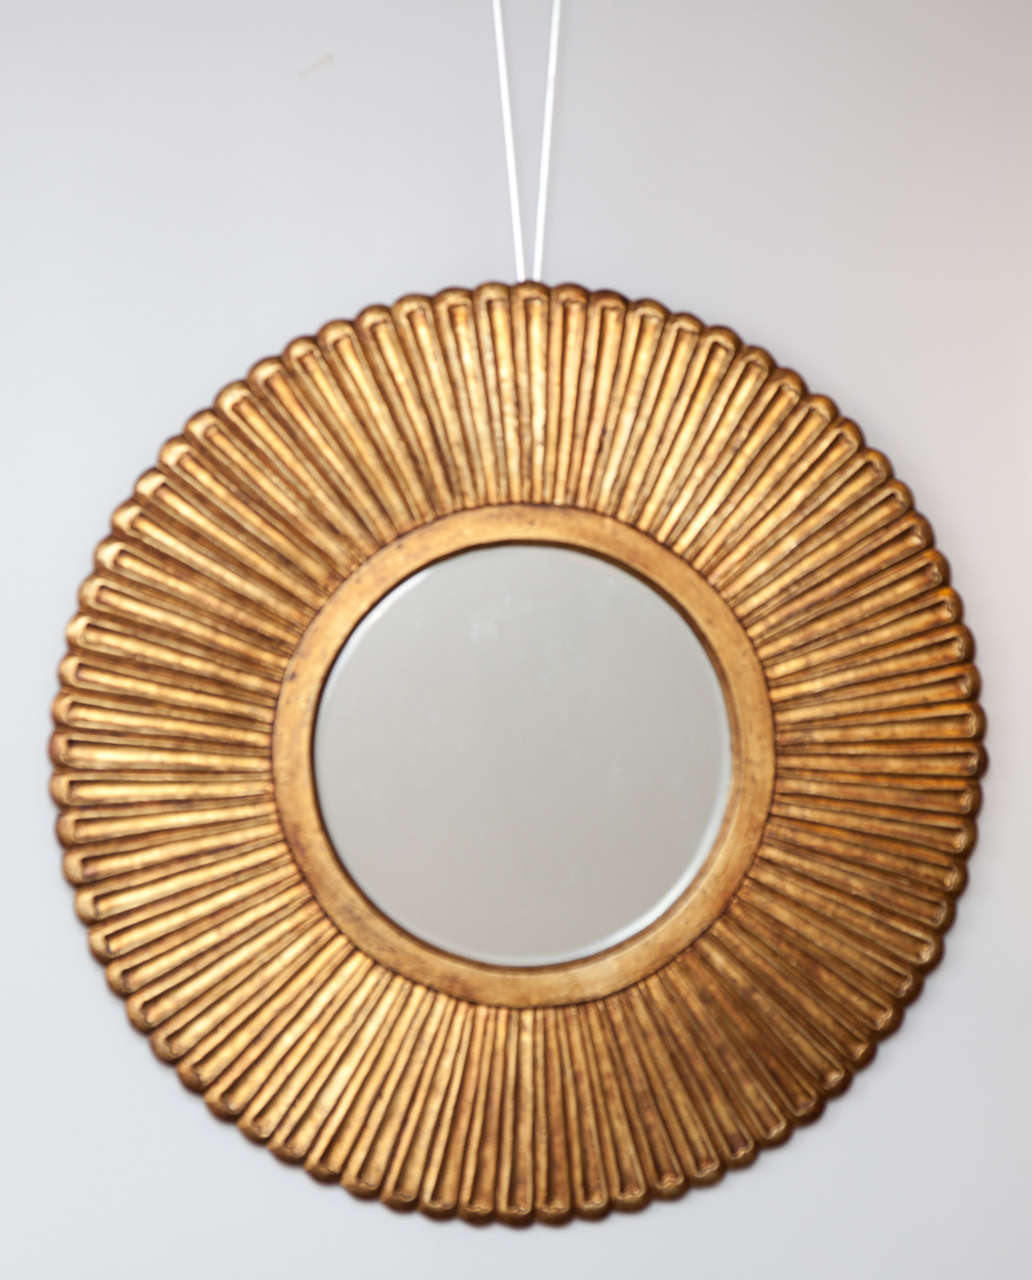 A Pair of gilt wood sunbursts or daisy mirrors with beveled glass, France, Ca. 1970